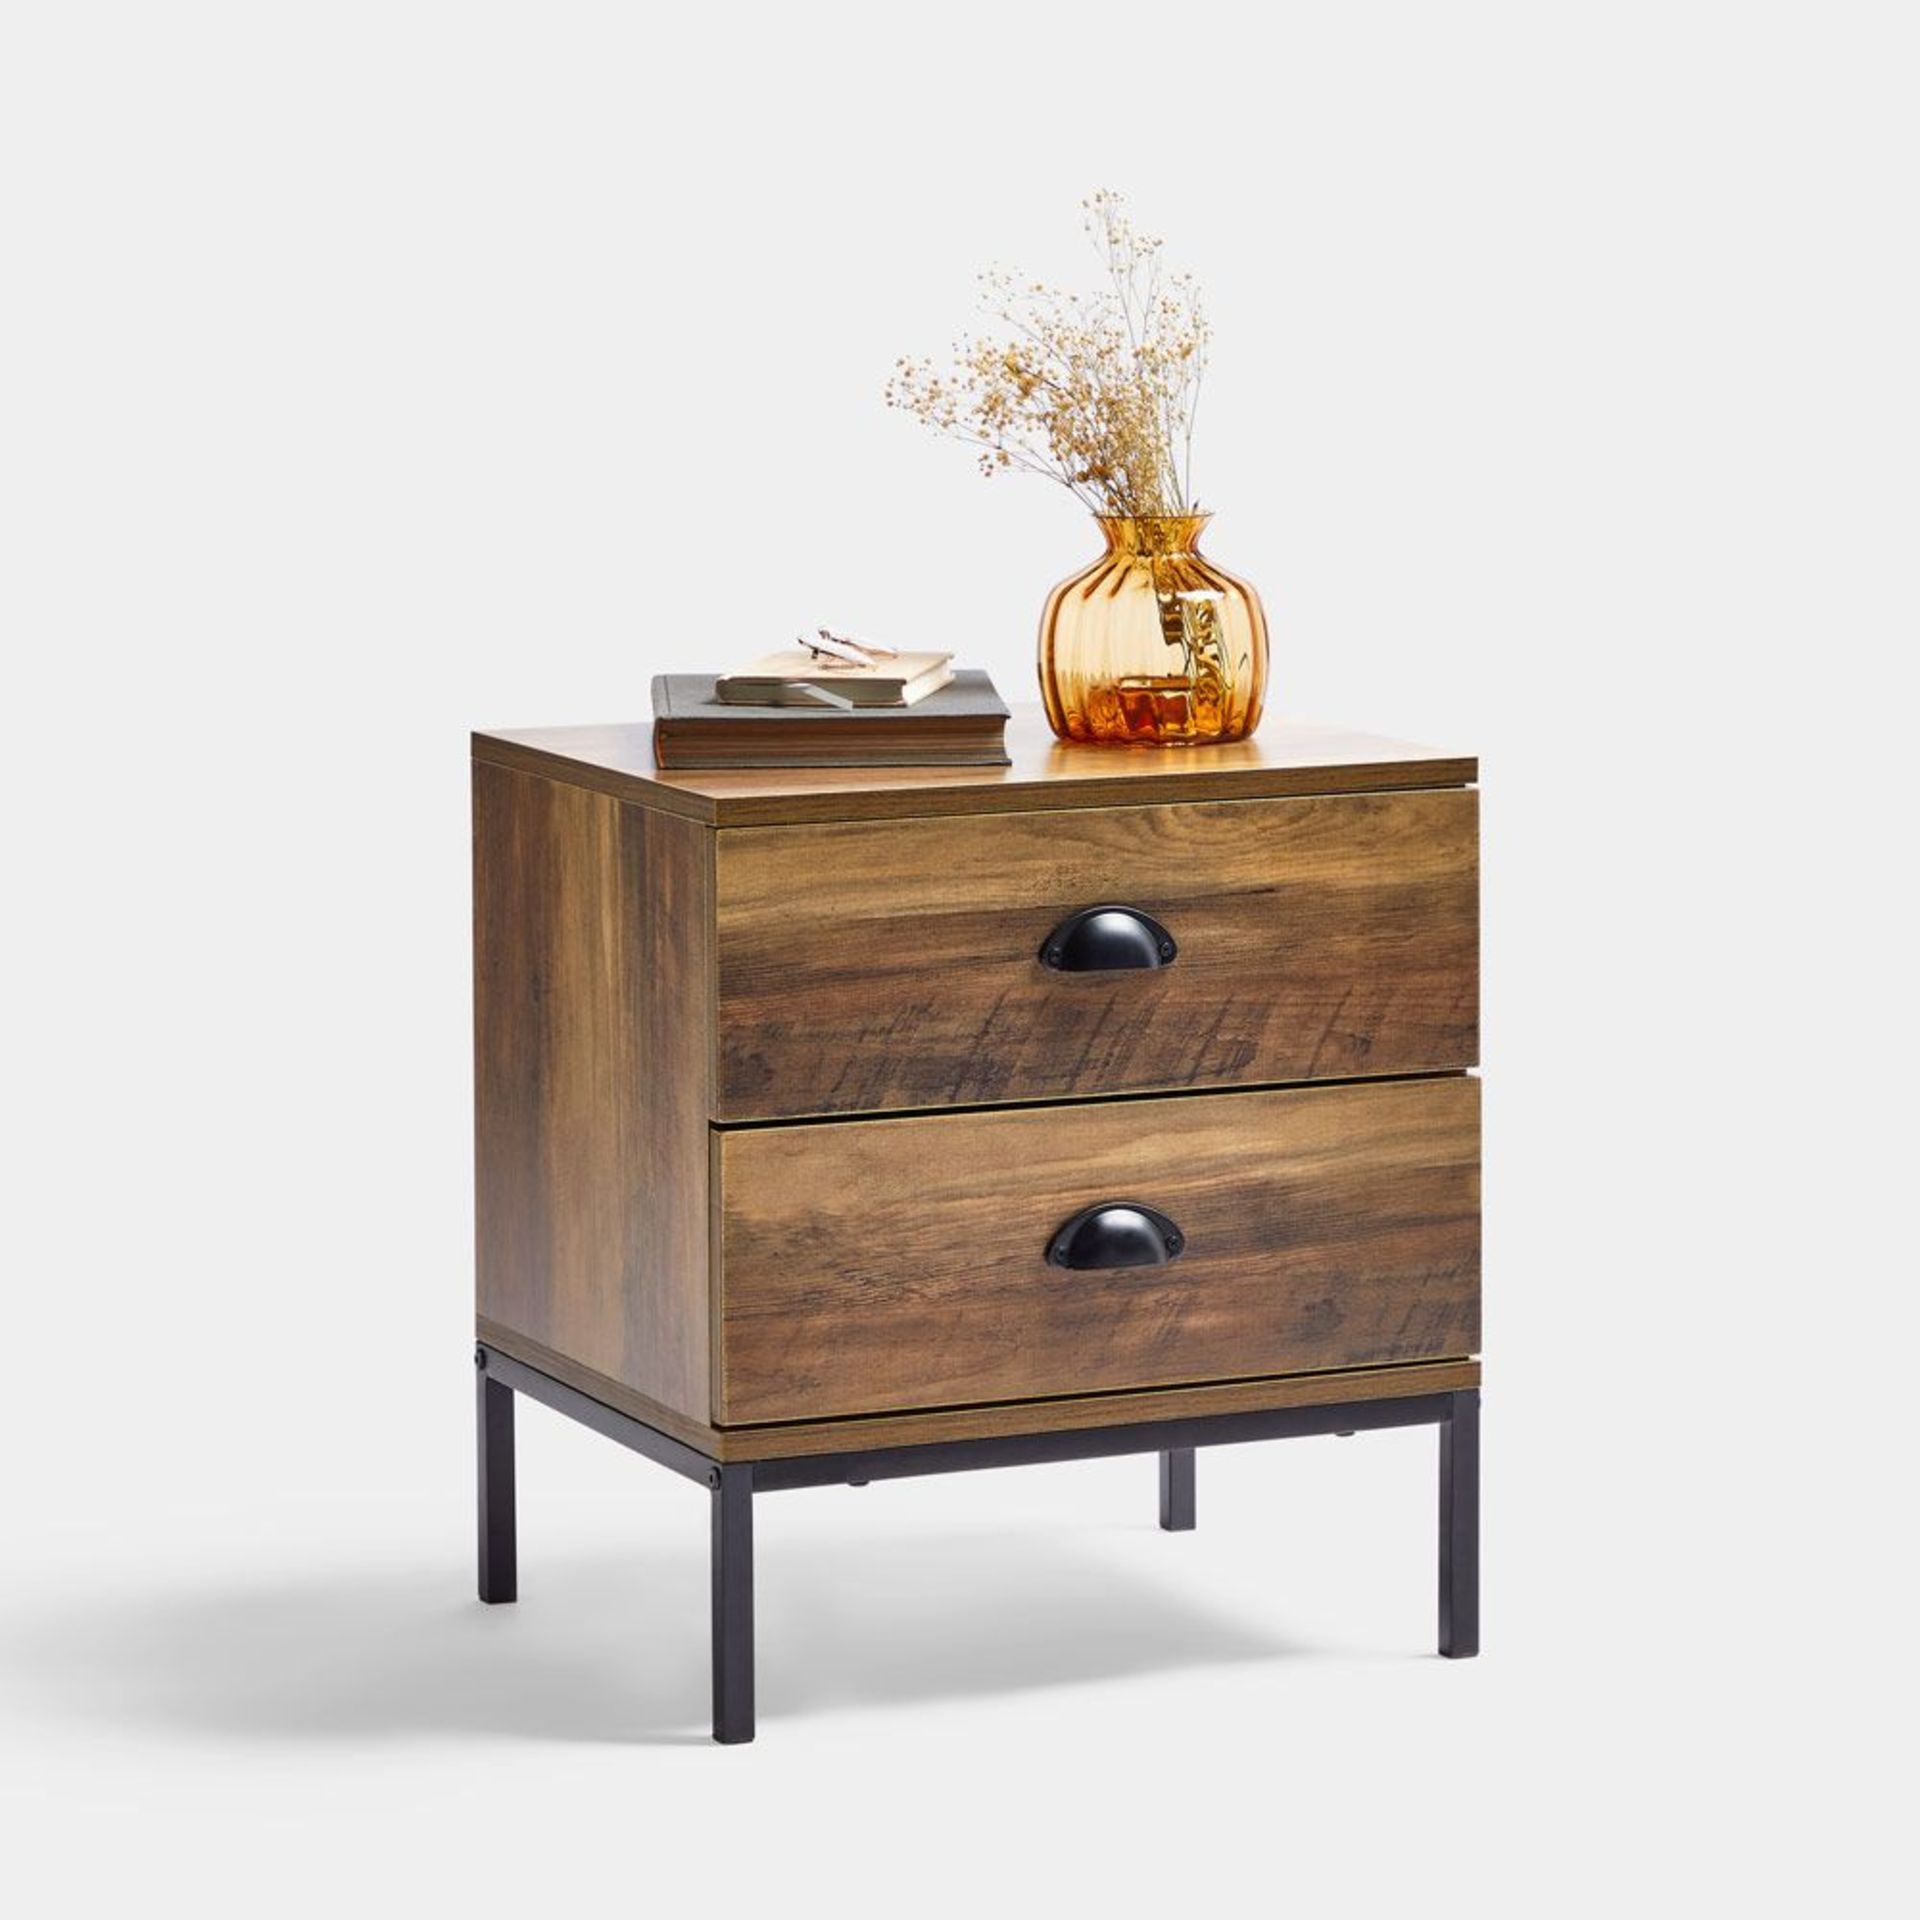 Jaxon 2 Drawer Bedside Table. - BI. Finished in a natural wood-effect colour to pair with any